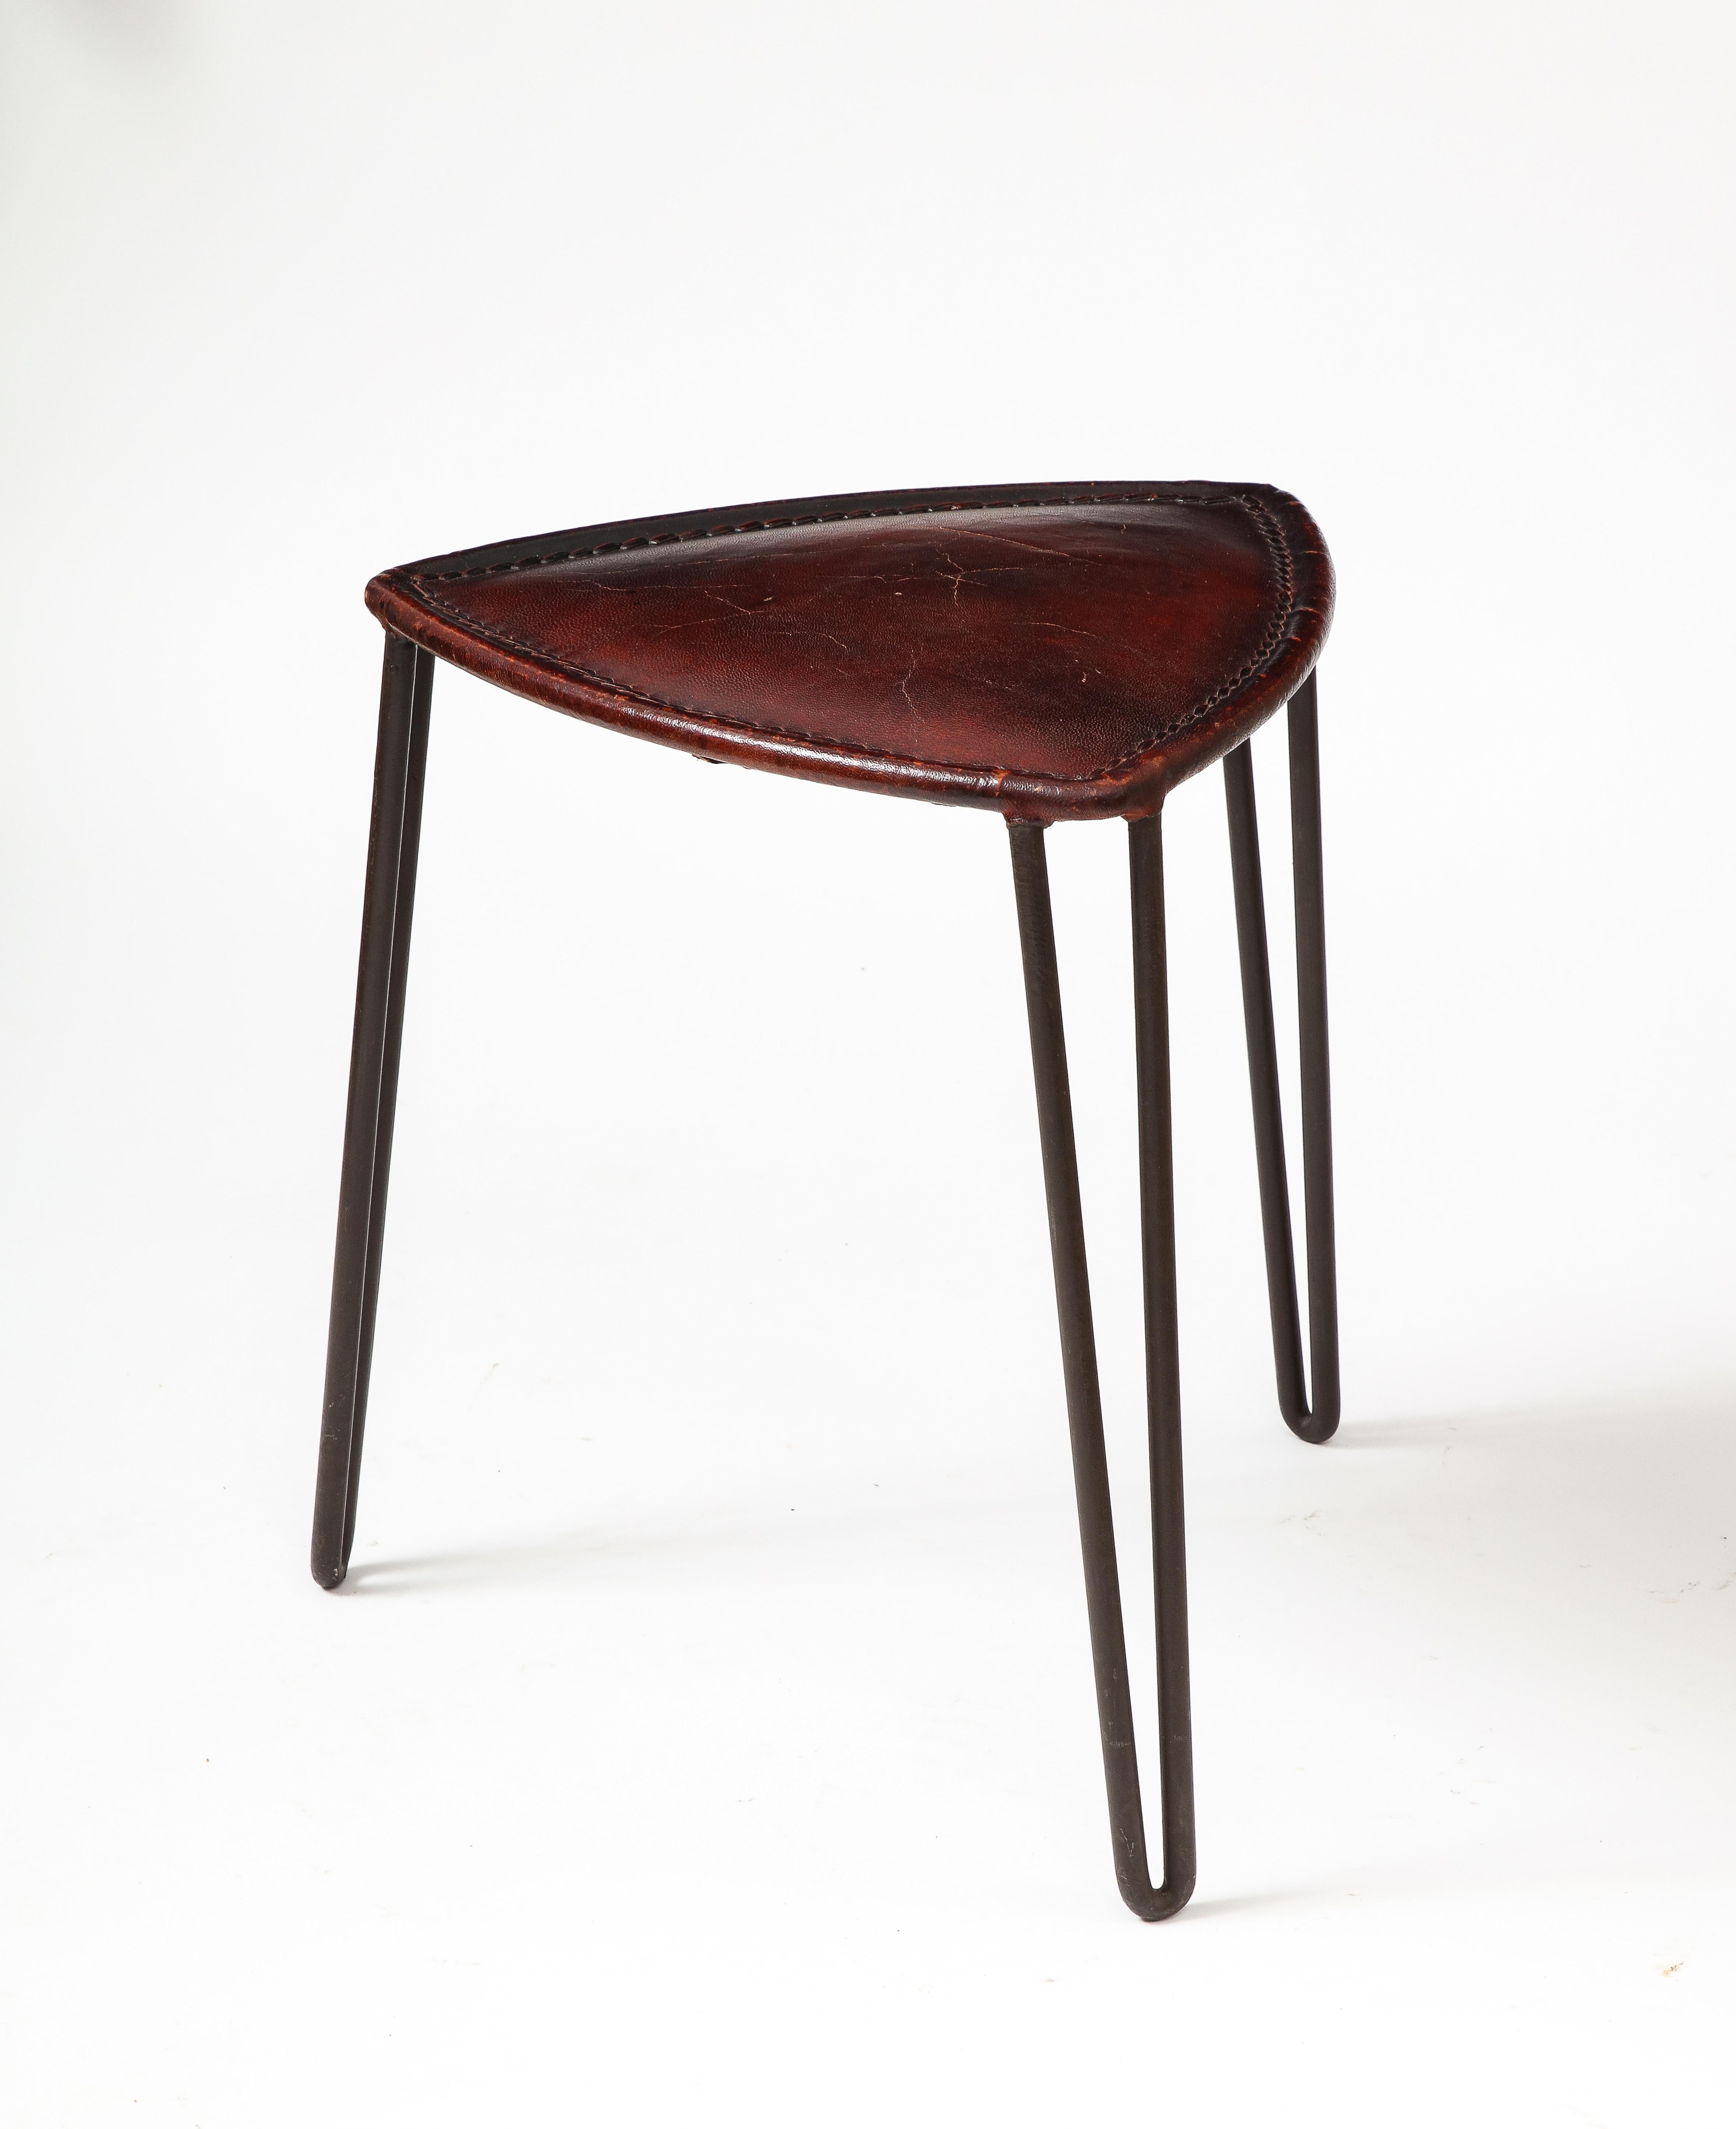 Leather and Metal Stool, France, c. 1950 In Good Condition For Sale In New York City, NY